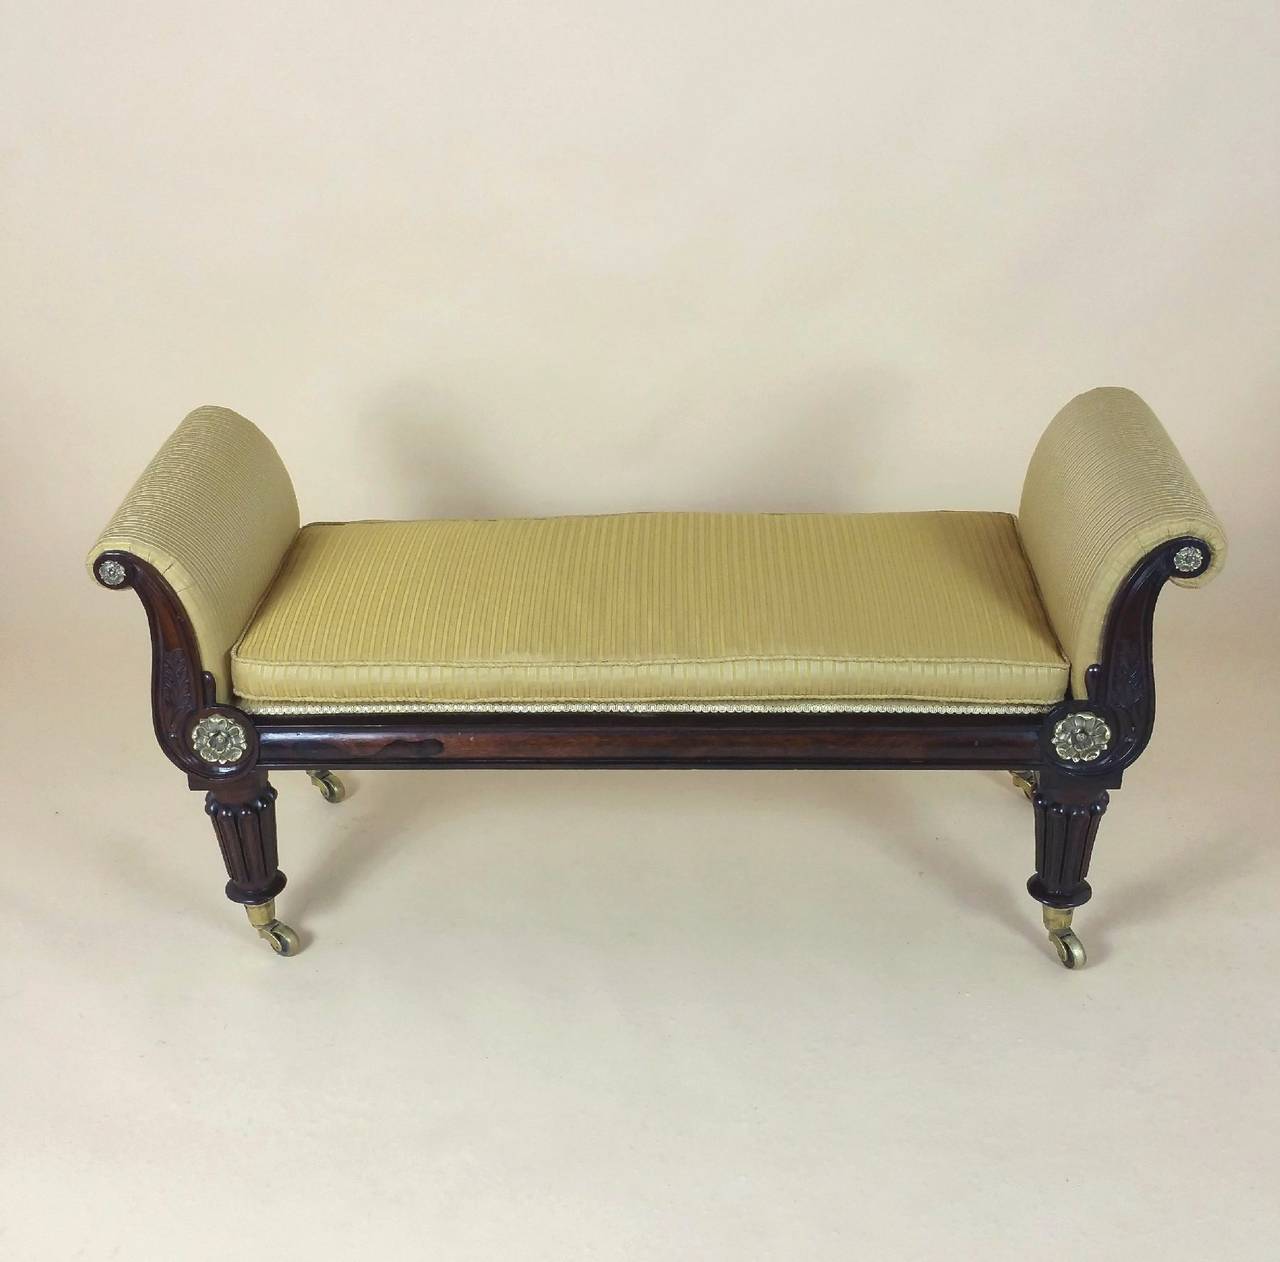 This elegant early 19th C. Rosewood window seat has detailed brass mounts and carved decoration, standing on Carved fluted legs and well-proportioned sized brass castors. The window seat is upholstered in a yellow gold ribbed patterned silk, with a